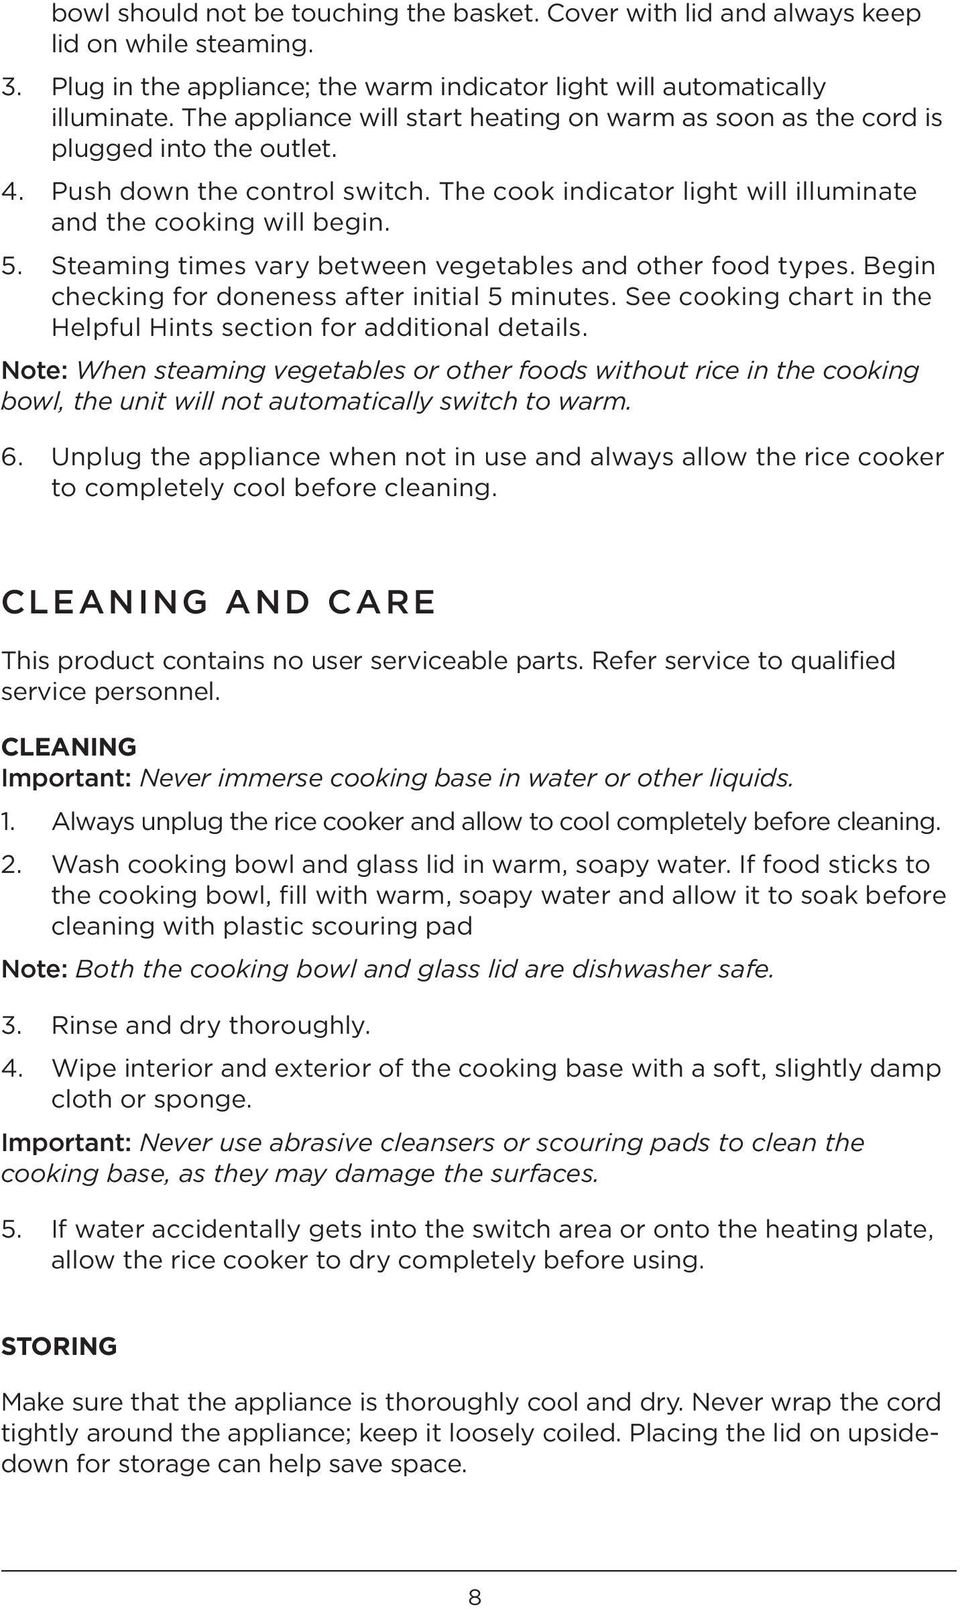 Steaming times vary between vegetables and other food types. Begin checking for doneness after initial 5. See cooking chart in the Helpful Hints section for additional details.